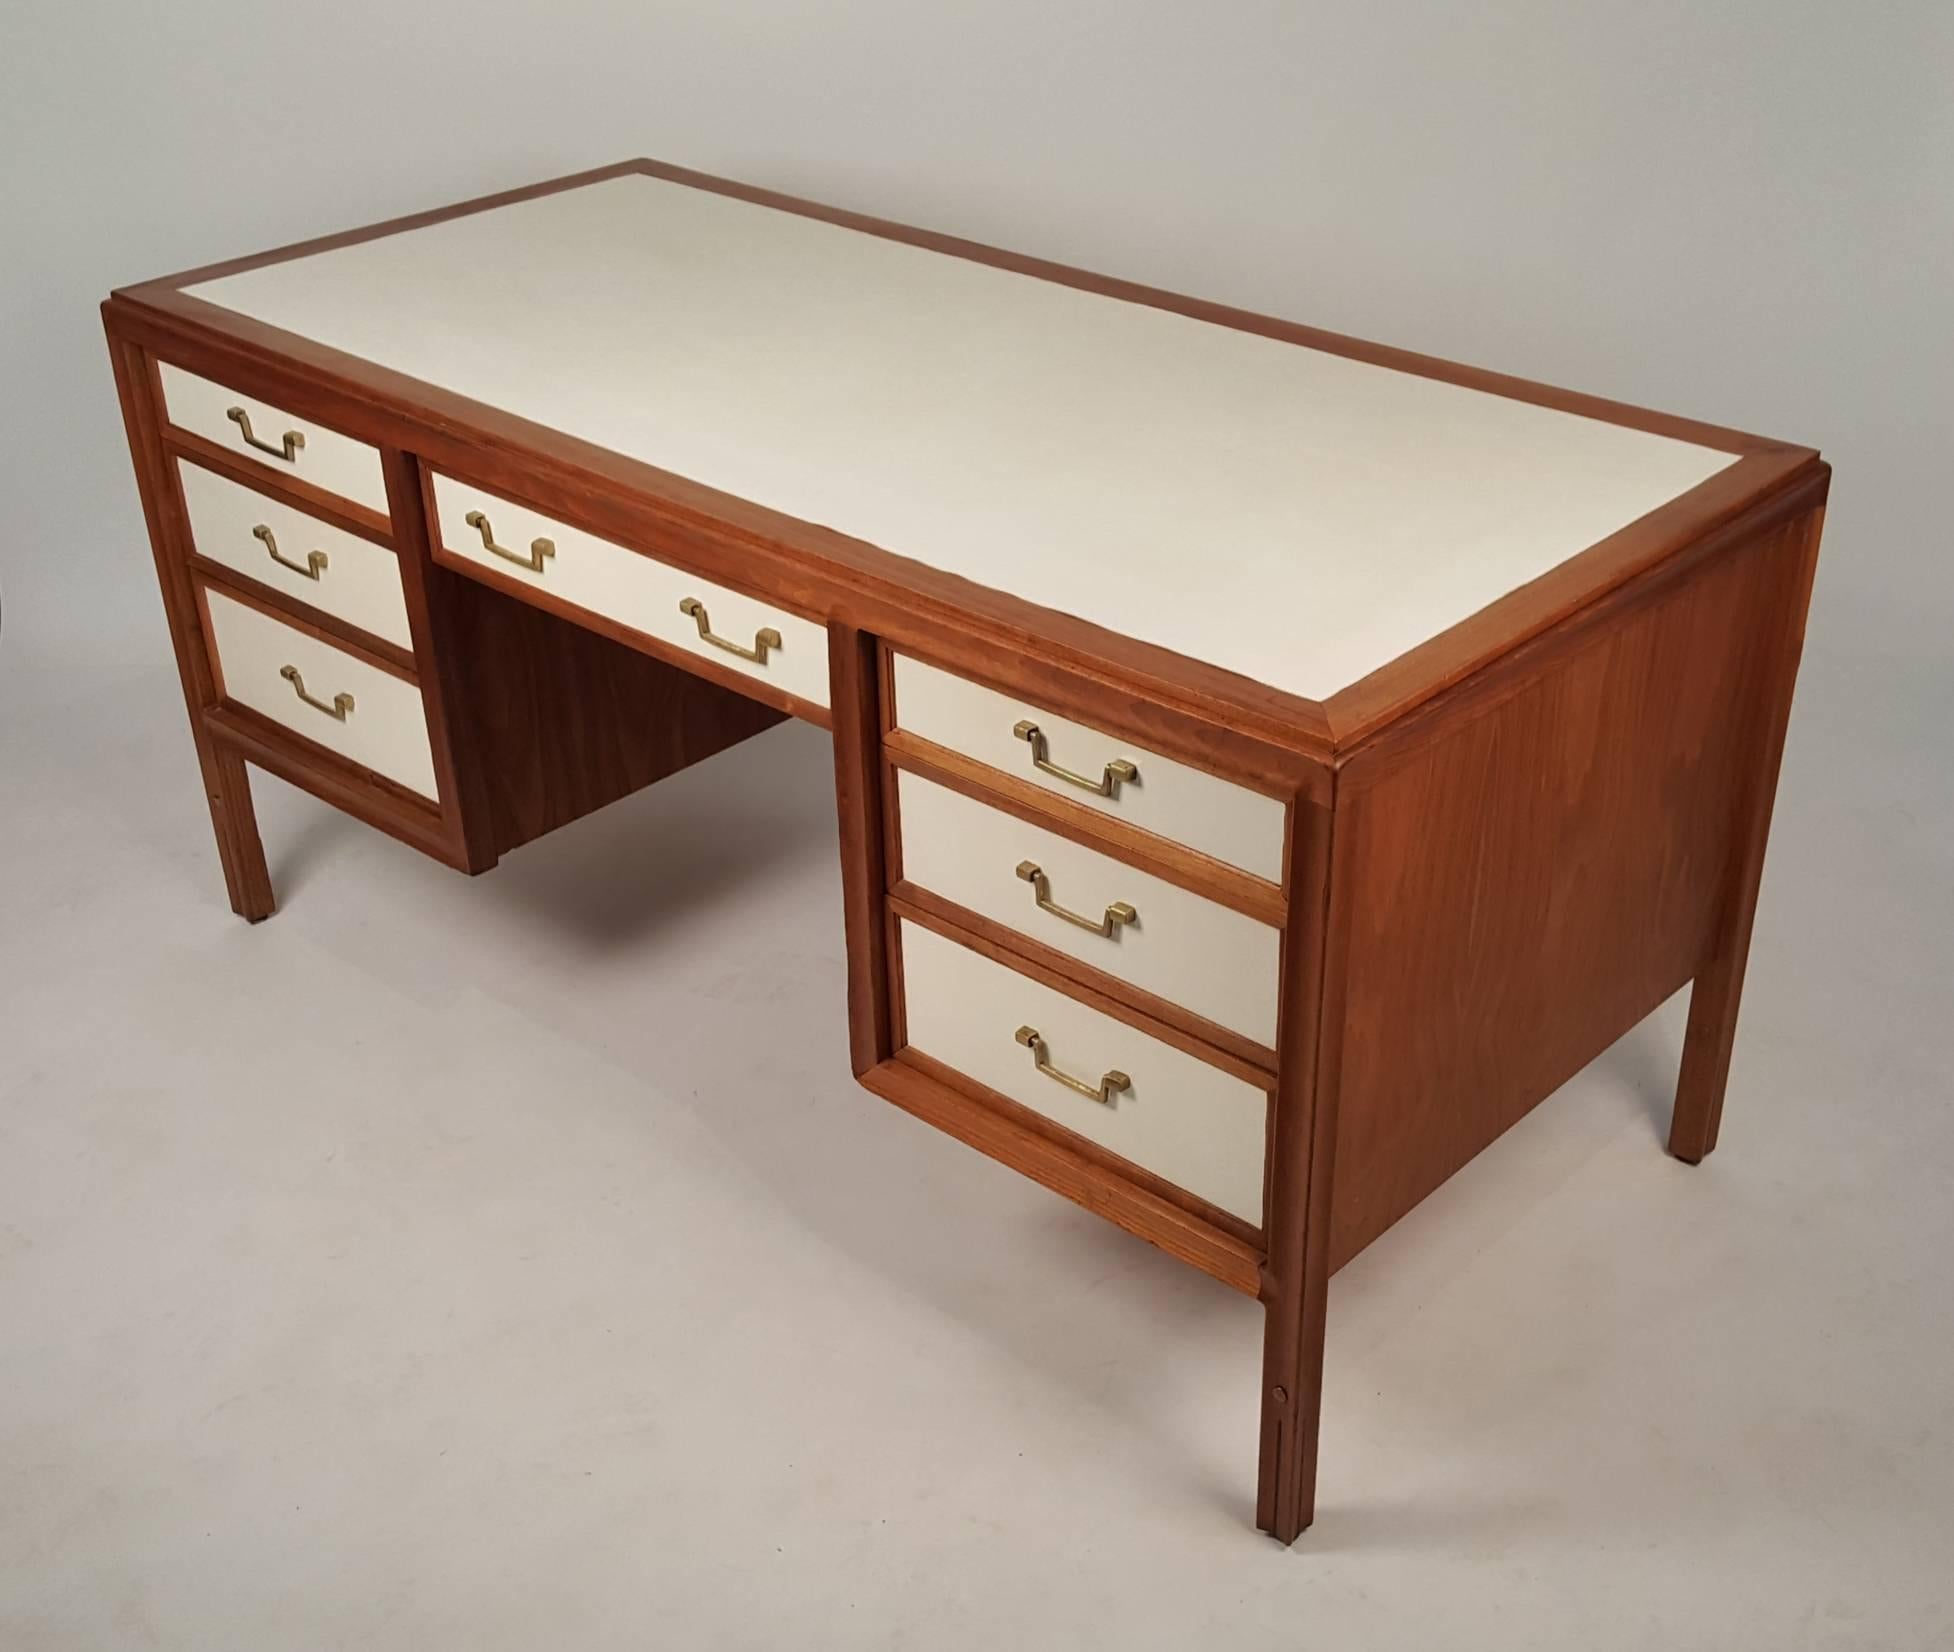 20th Century Walnut Campaign Desk with Leather Top and Drawers by Gerry Zanck